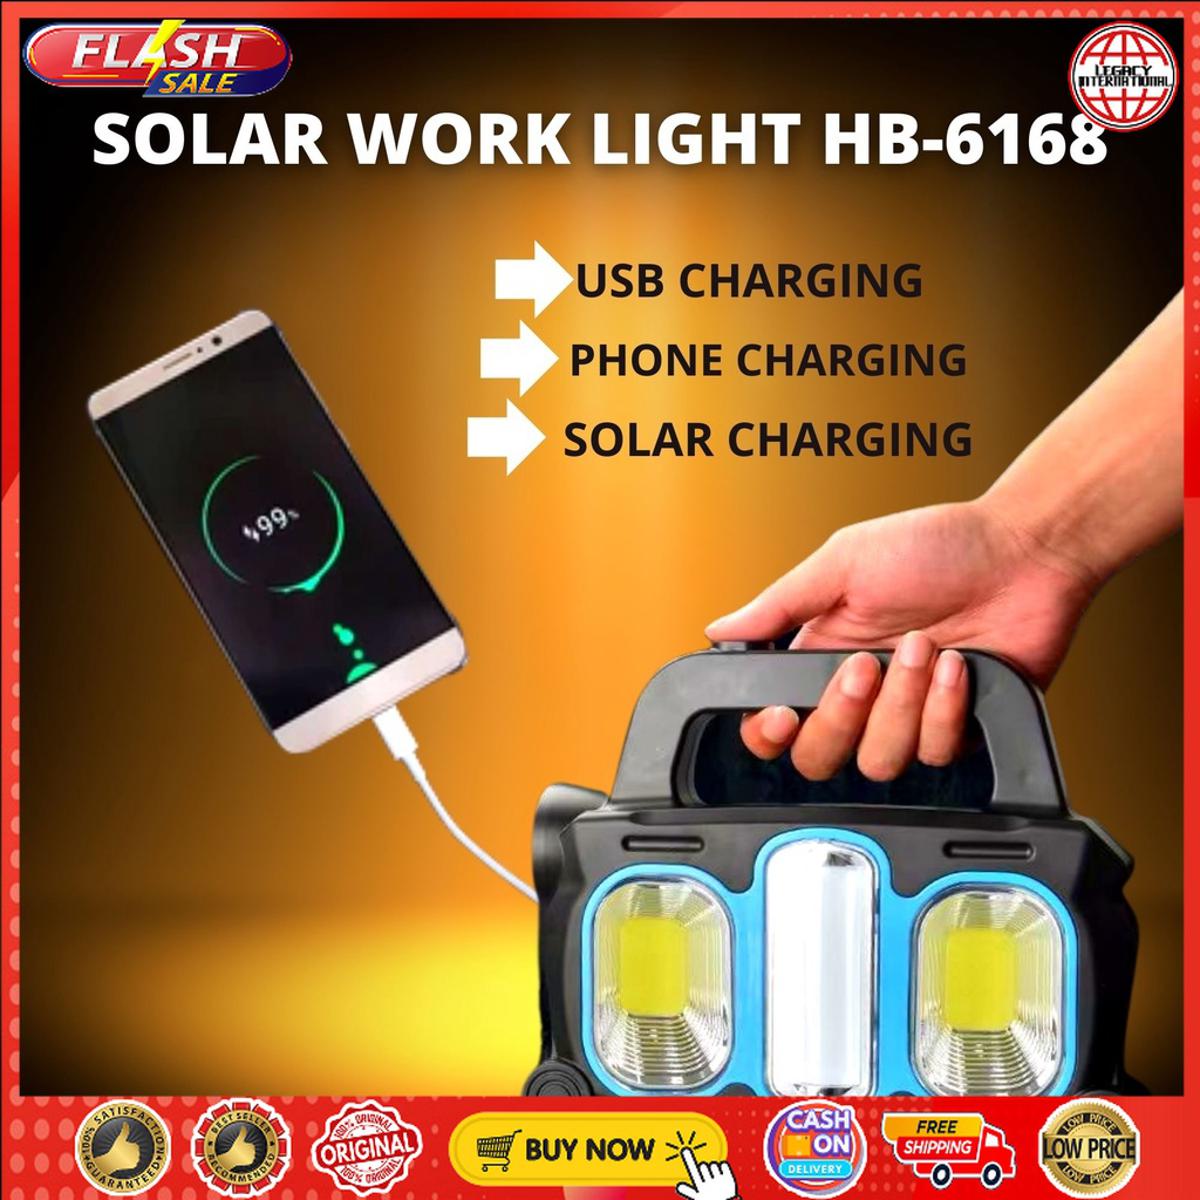 Best works HB-6168 Hurry Bolt Light Solar rechargeable portable lamp multifunctional camping emergency light